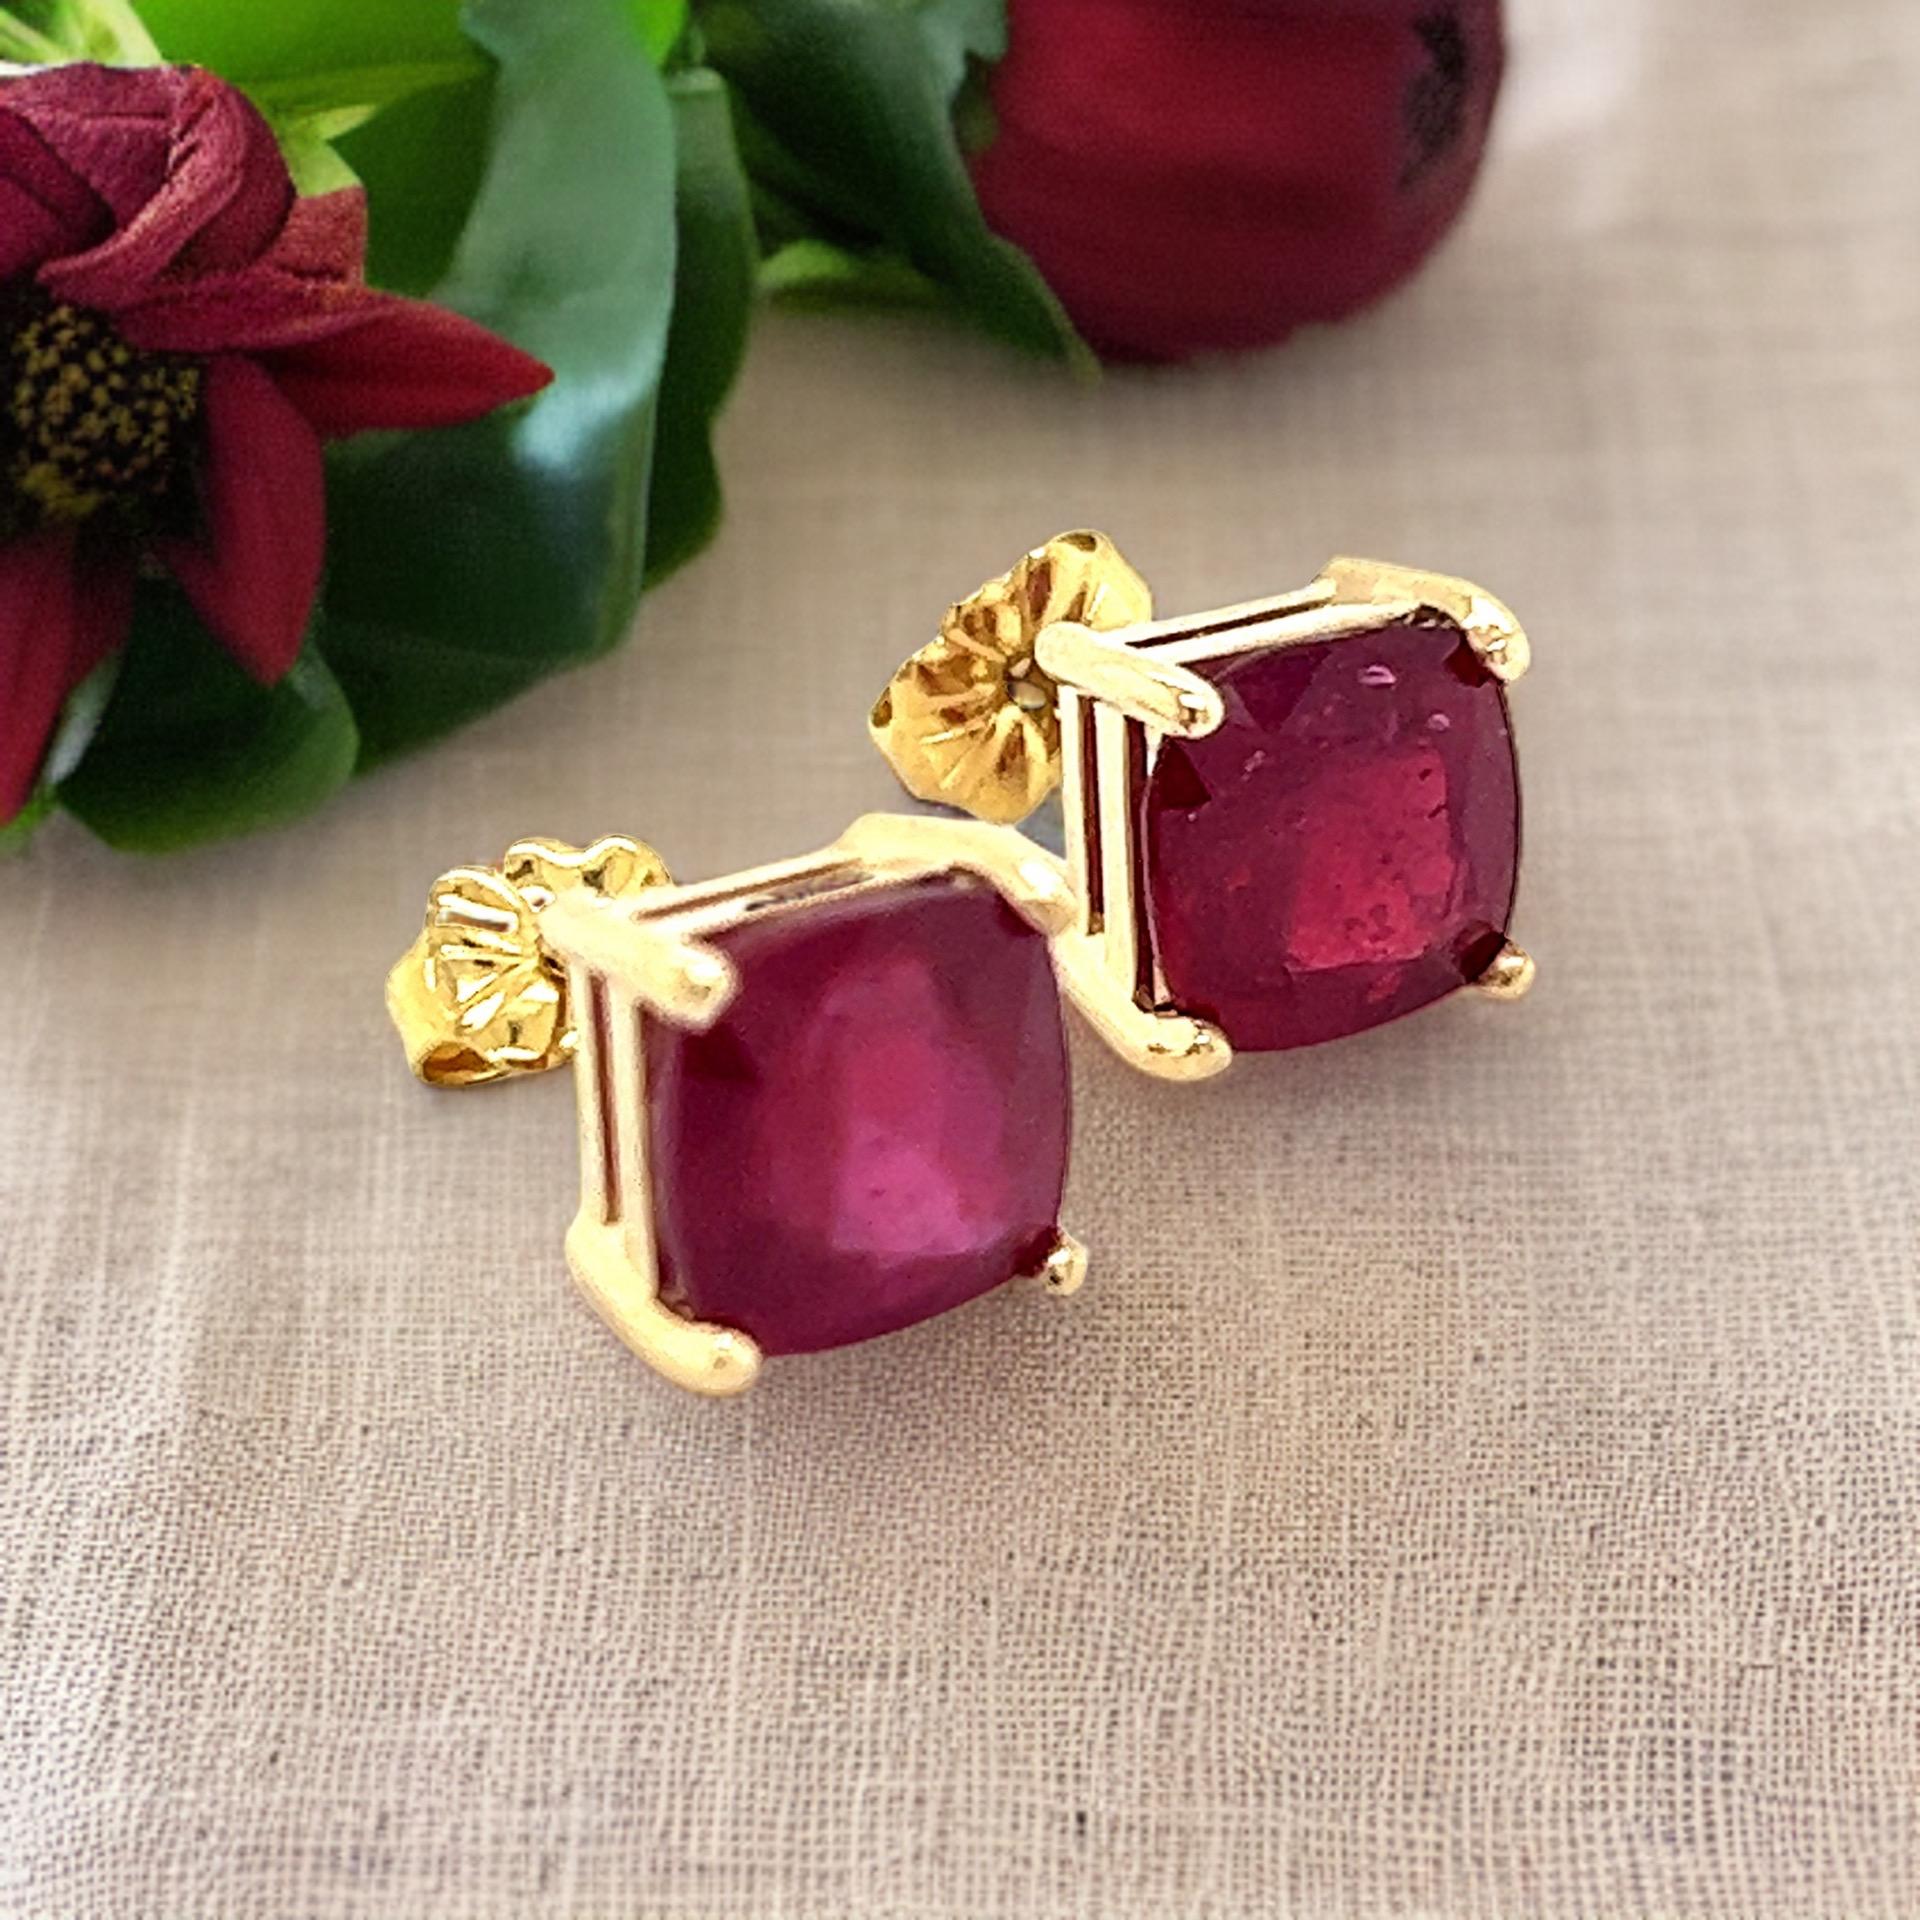 Natural Finely Faceted Quality Composite Ruby Stud Earrings 14k Yellow Gold 4.18 TW Certified $799 307907

This is a Unique Custom Made Glamorous Piece of Jewelry!

Nothing says, “I Love you” more than Diamonds and Pearls!

These Ruby earrings have